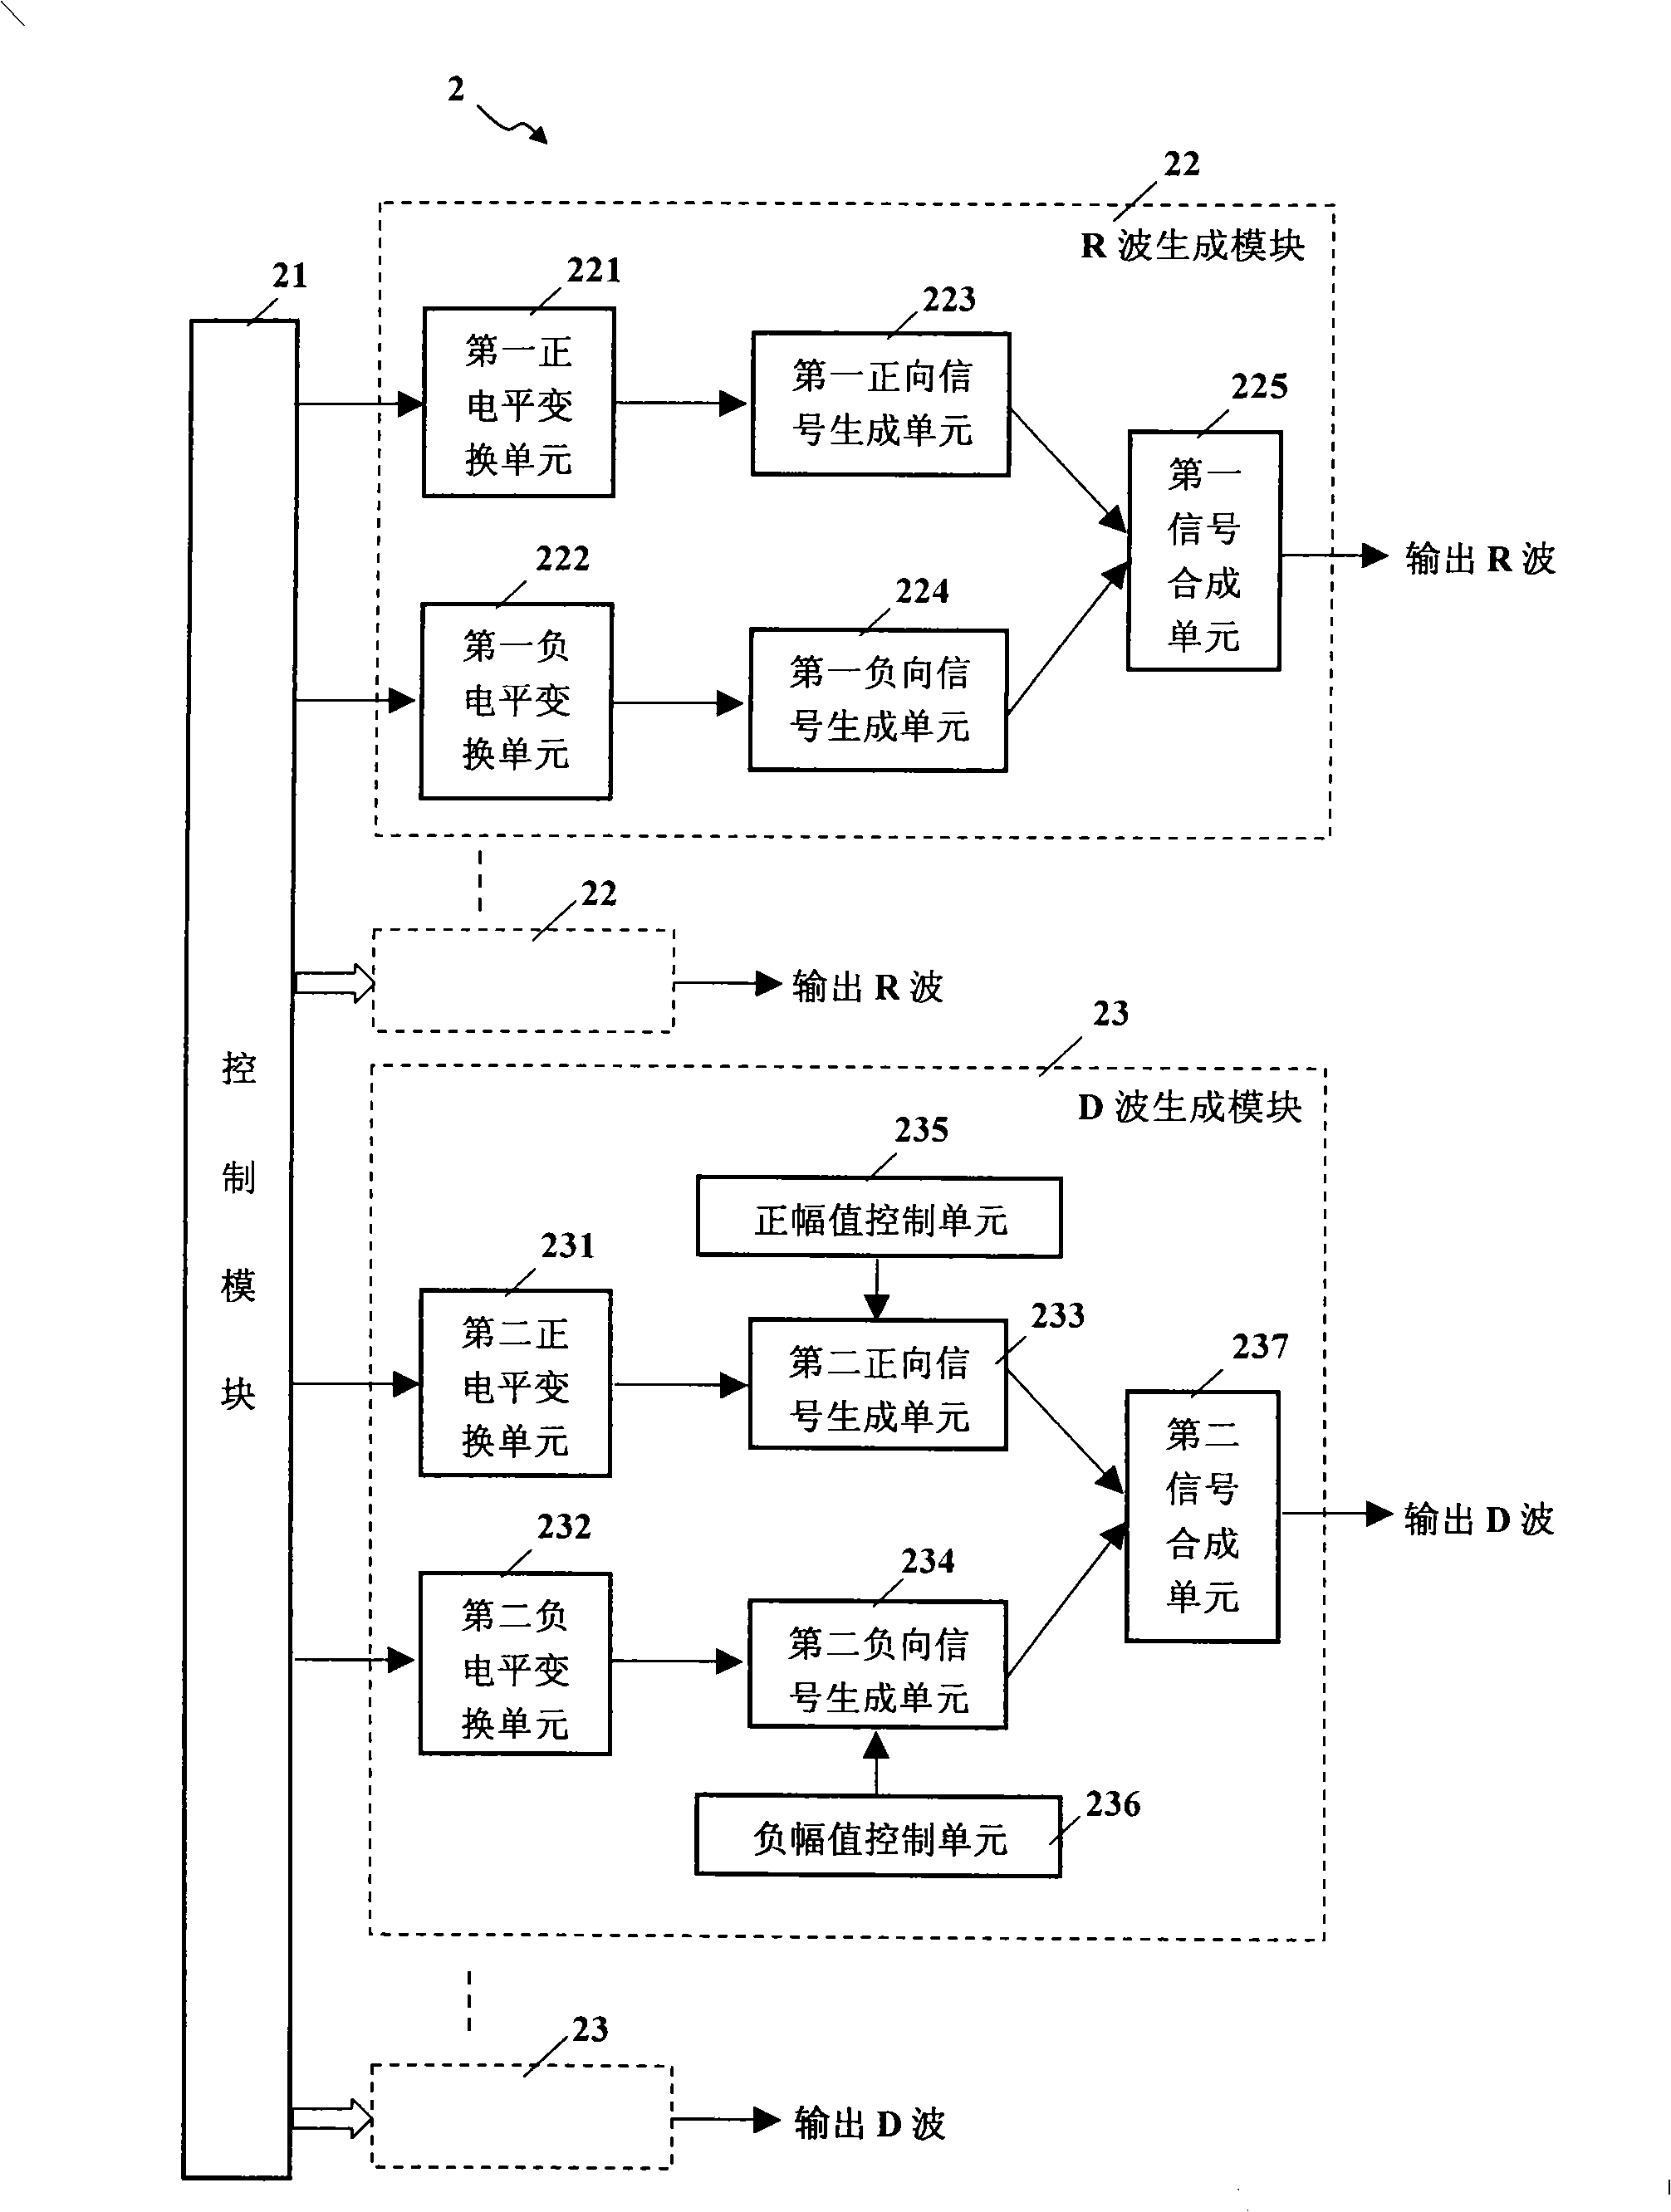 Driving circuit for smectic state LCD display